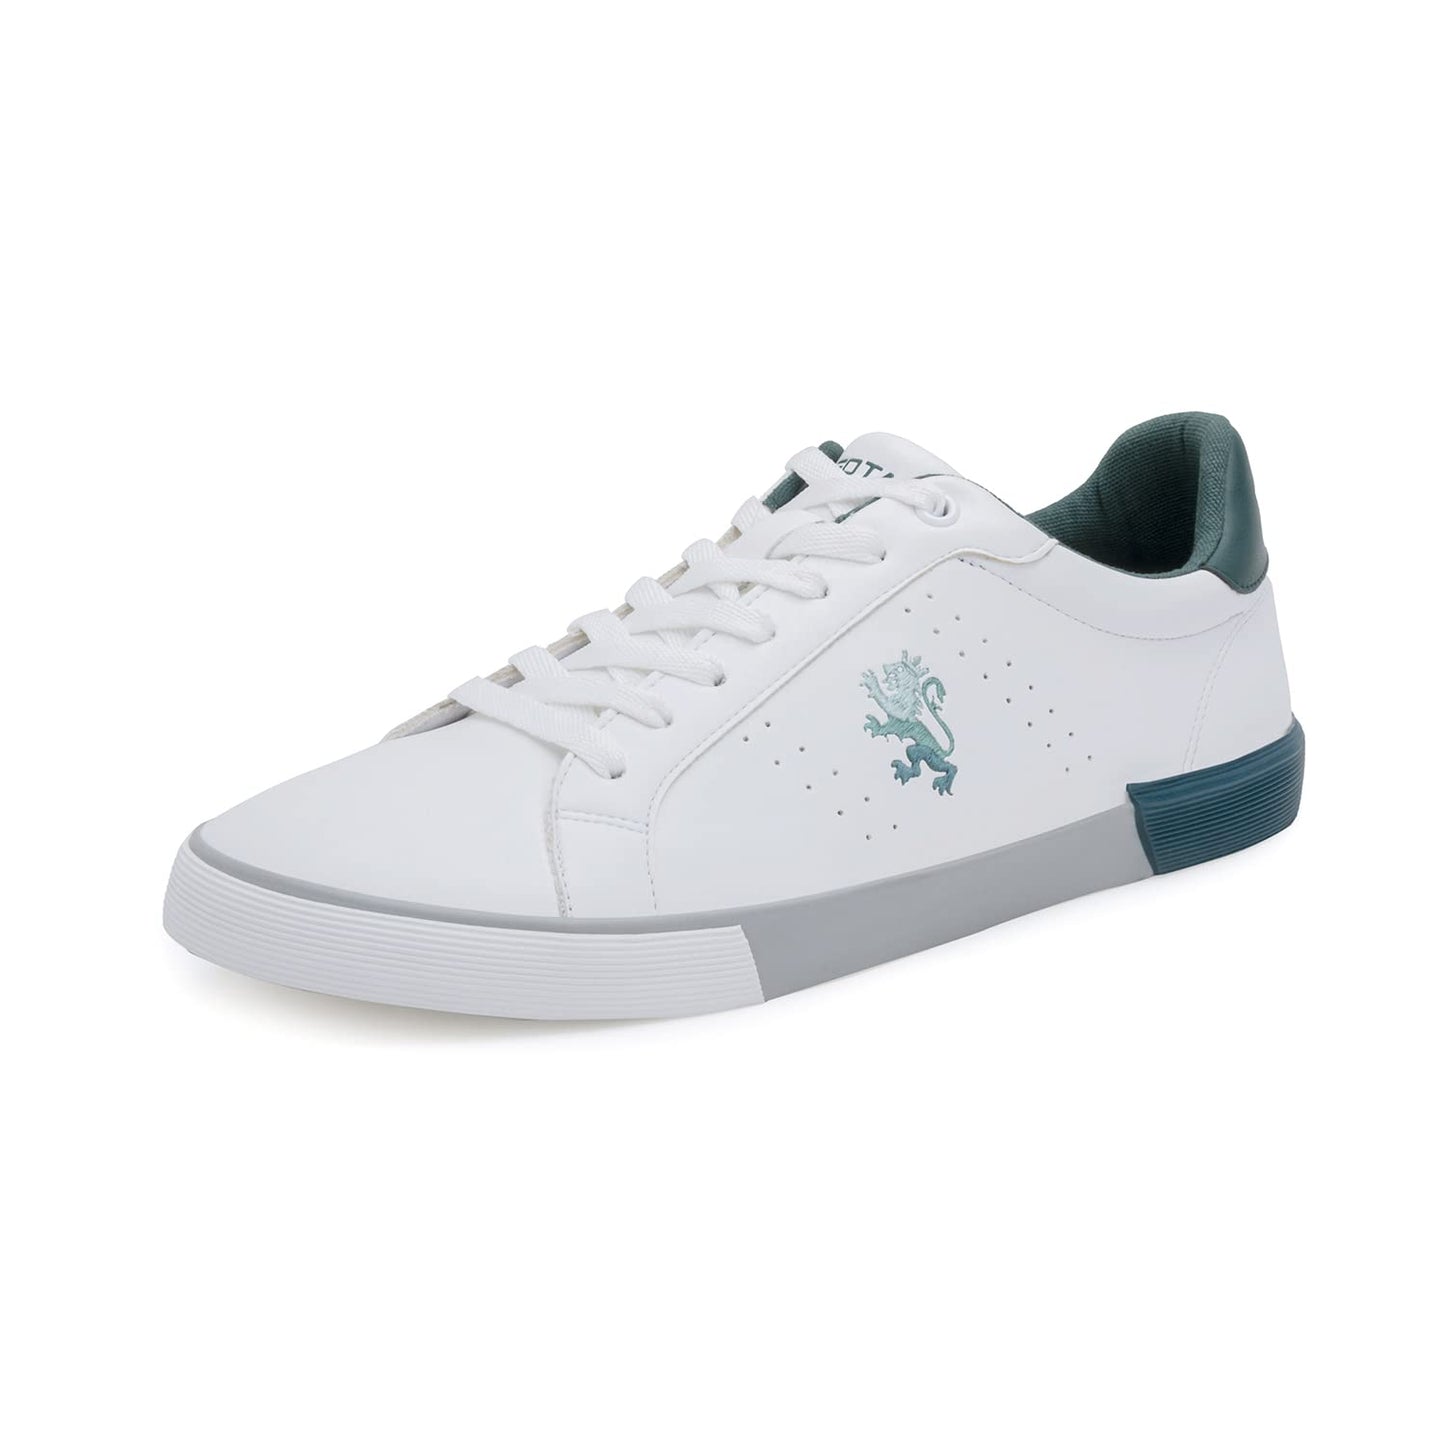 Red Tape Mens White/Teal Sneakers